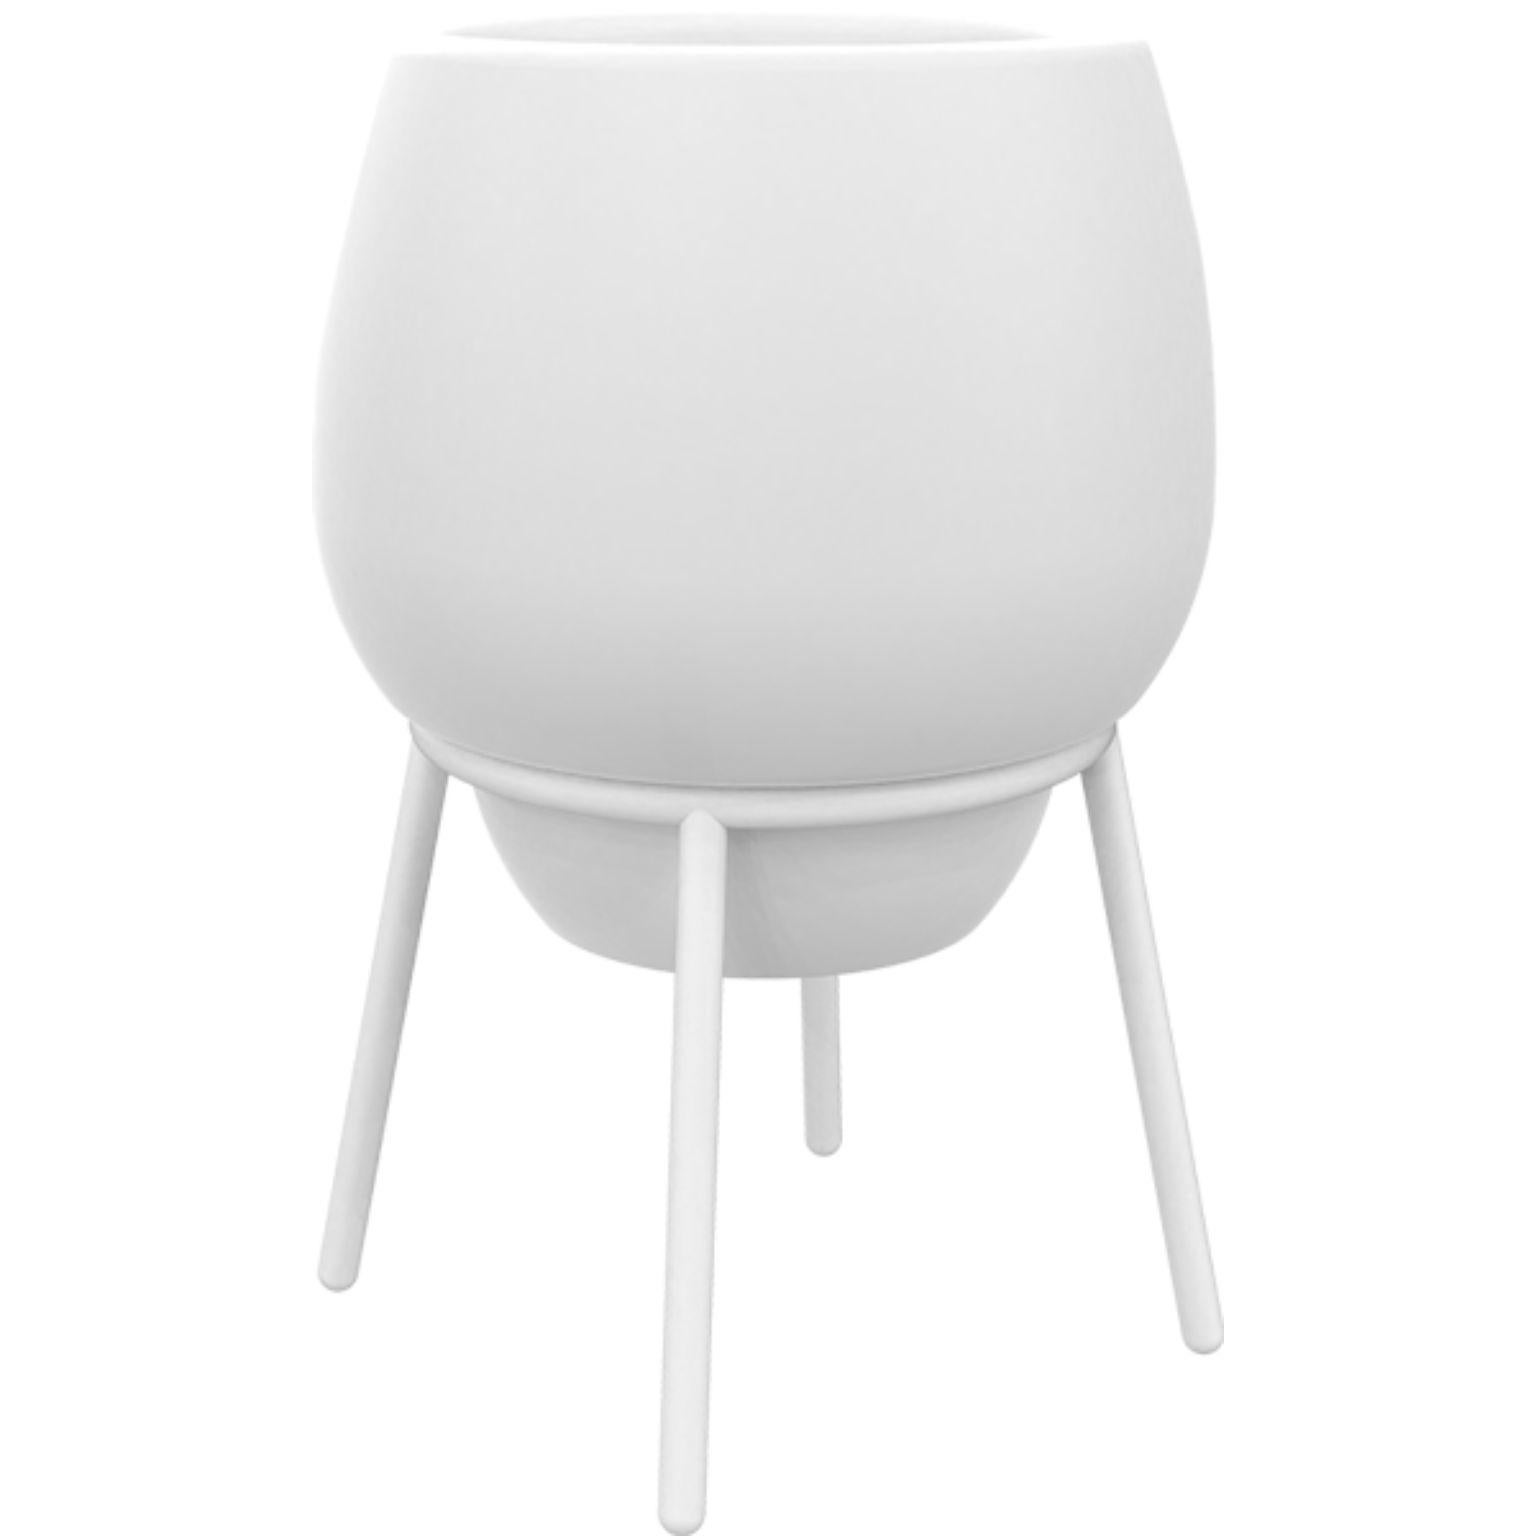 Lace White 50 low pot by MOWEE
Dimensions: Ø55 x H76 cm.
Material: Polyethylene and stainless steel.
Weight: 6 kg.
Also available in different colors and finishes (Lacquered or retroilluminated). 

Lace is a collection of furniture made by